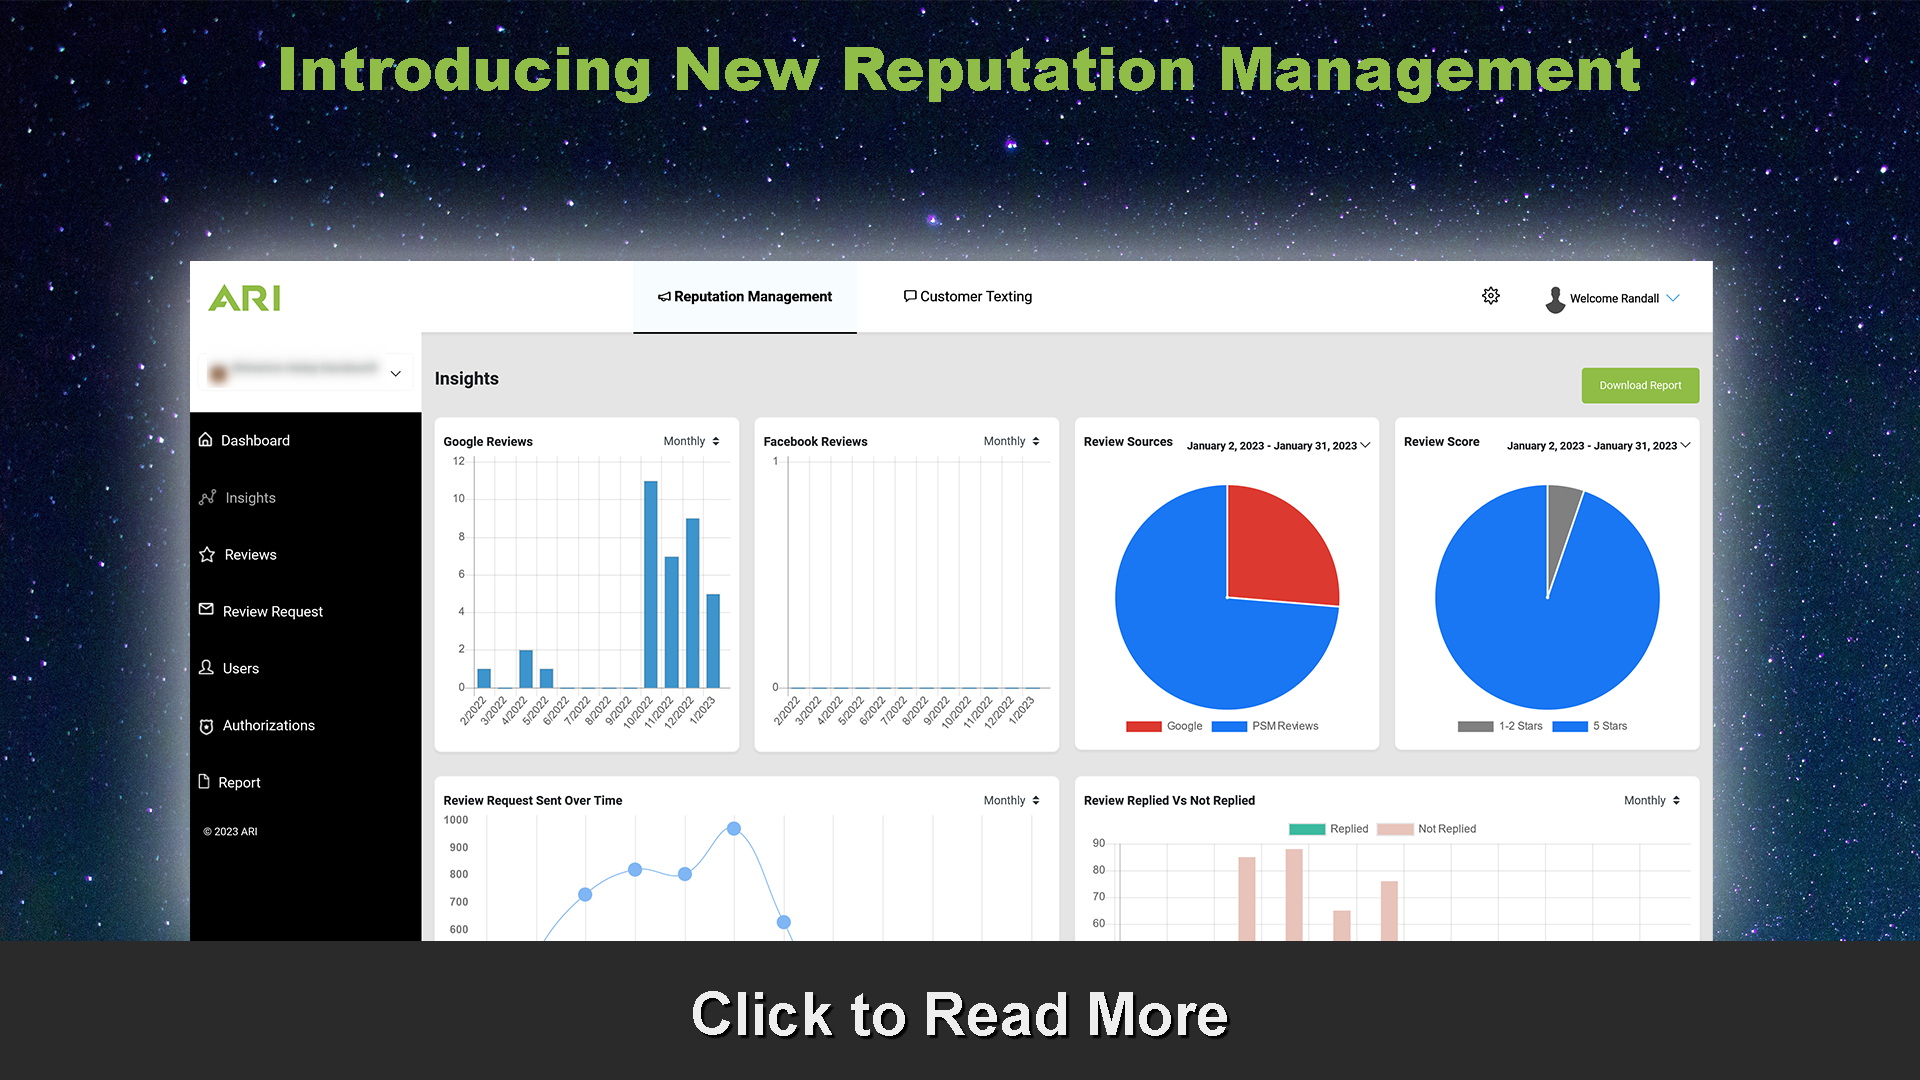 Learn about reputation management services